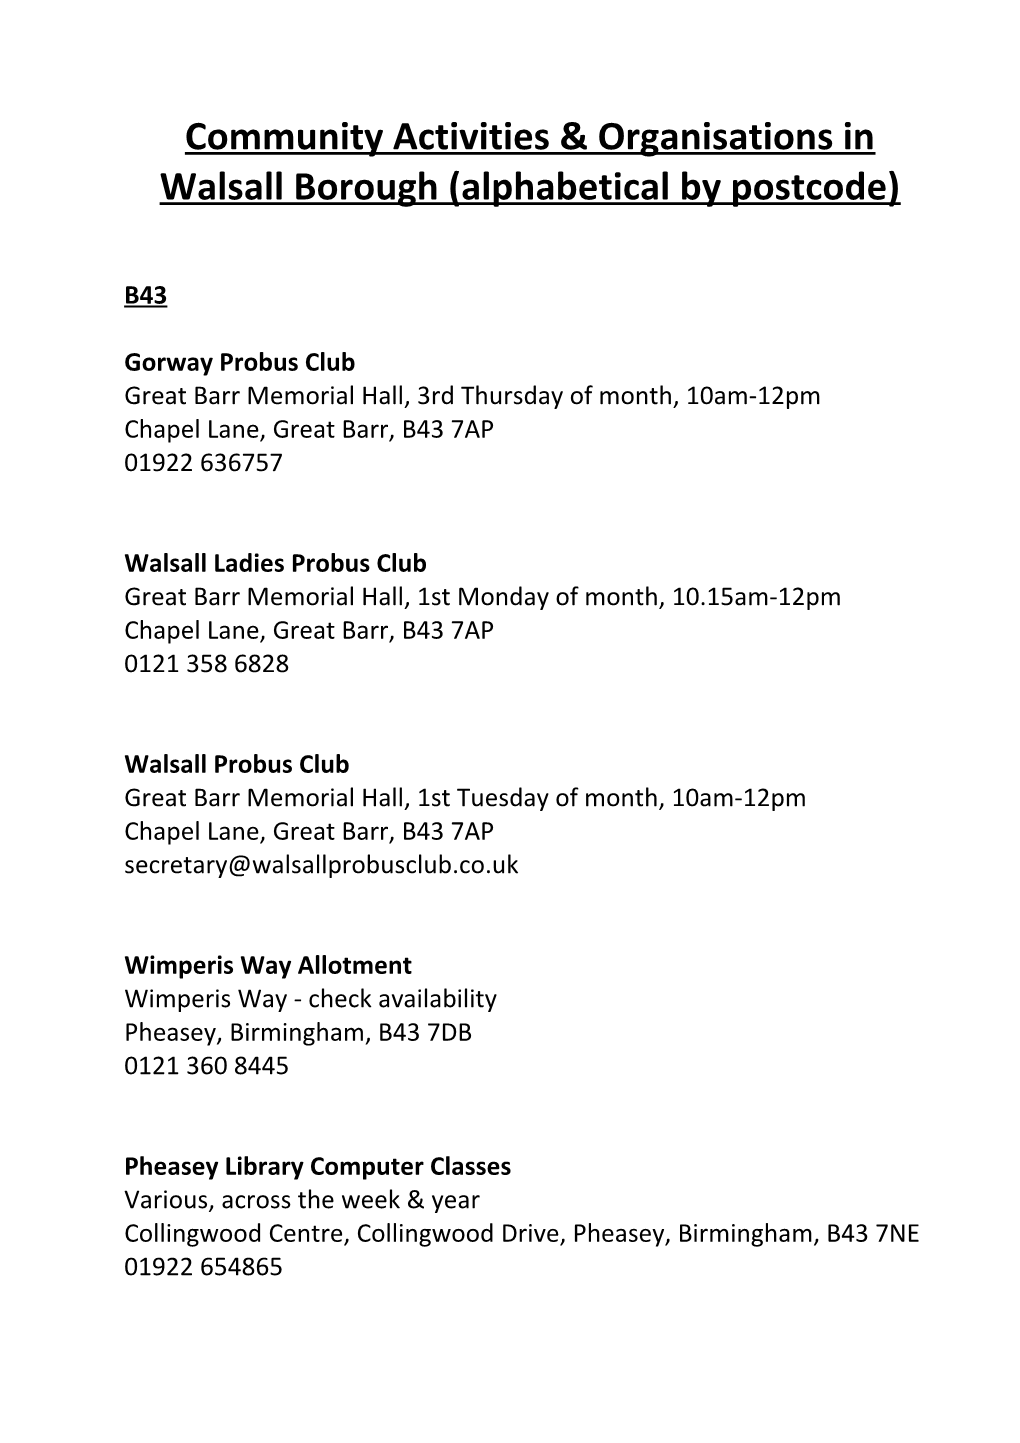 Community Activities & Organisations in Walsall Borough (Alphabetical by Postcode)